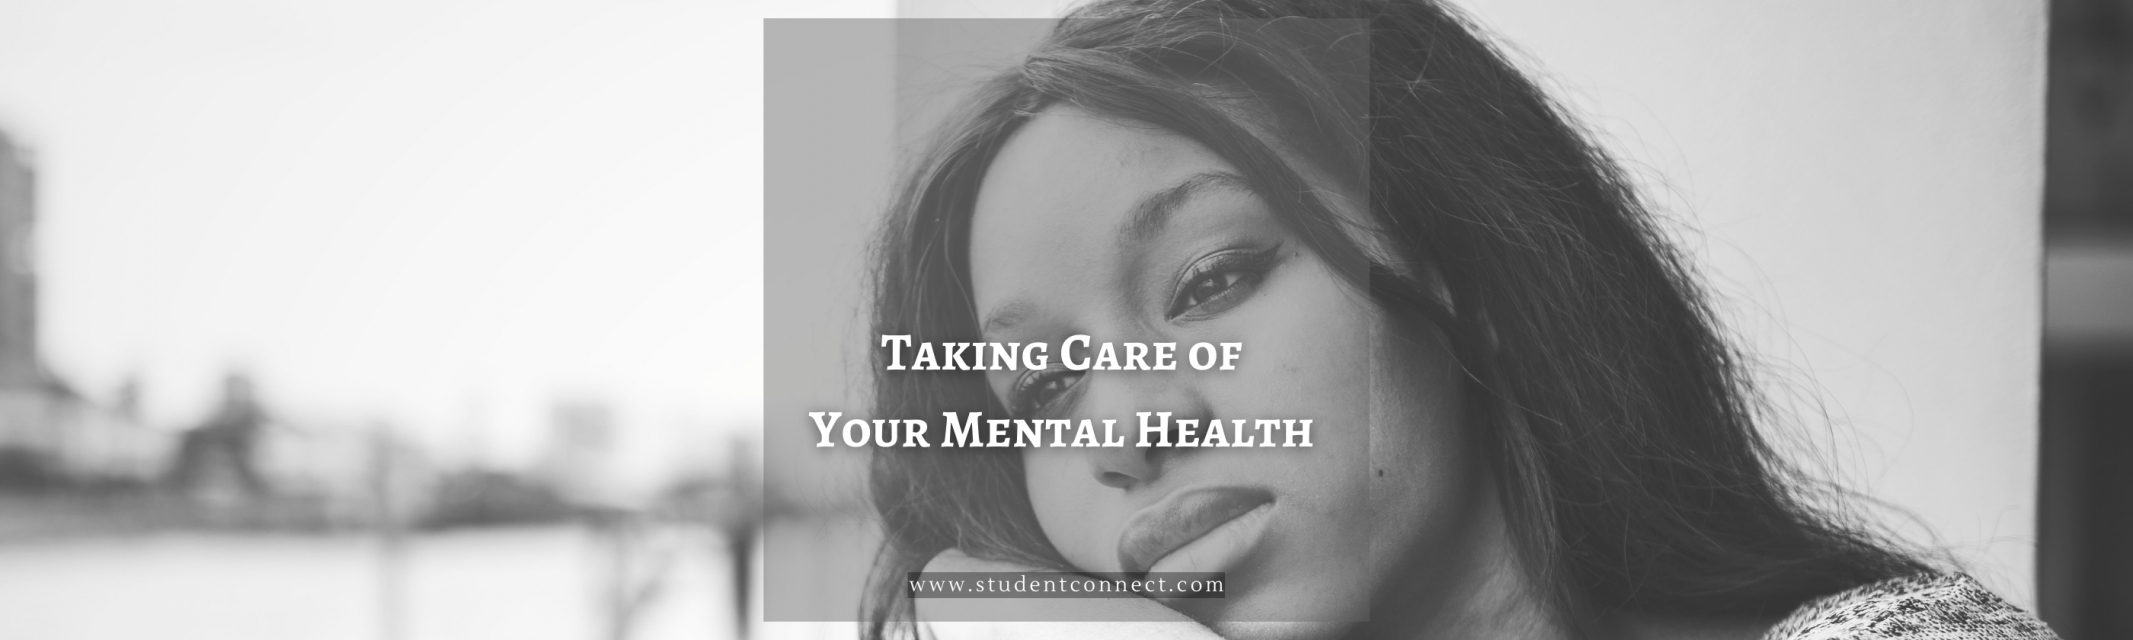 Taking care of your mental health Vs Being Strong: Seek help when needed